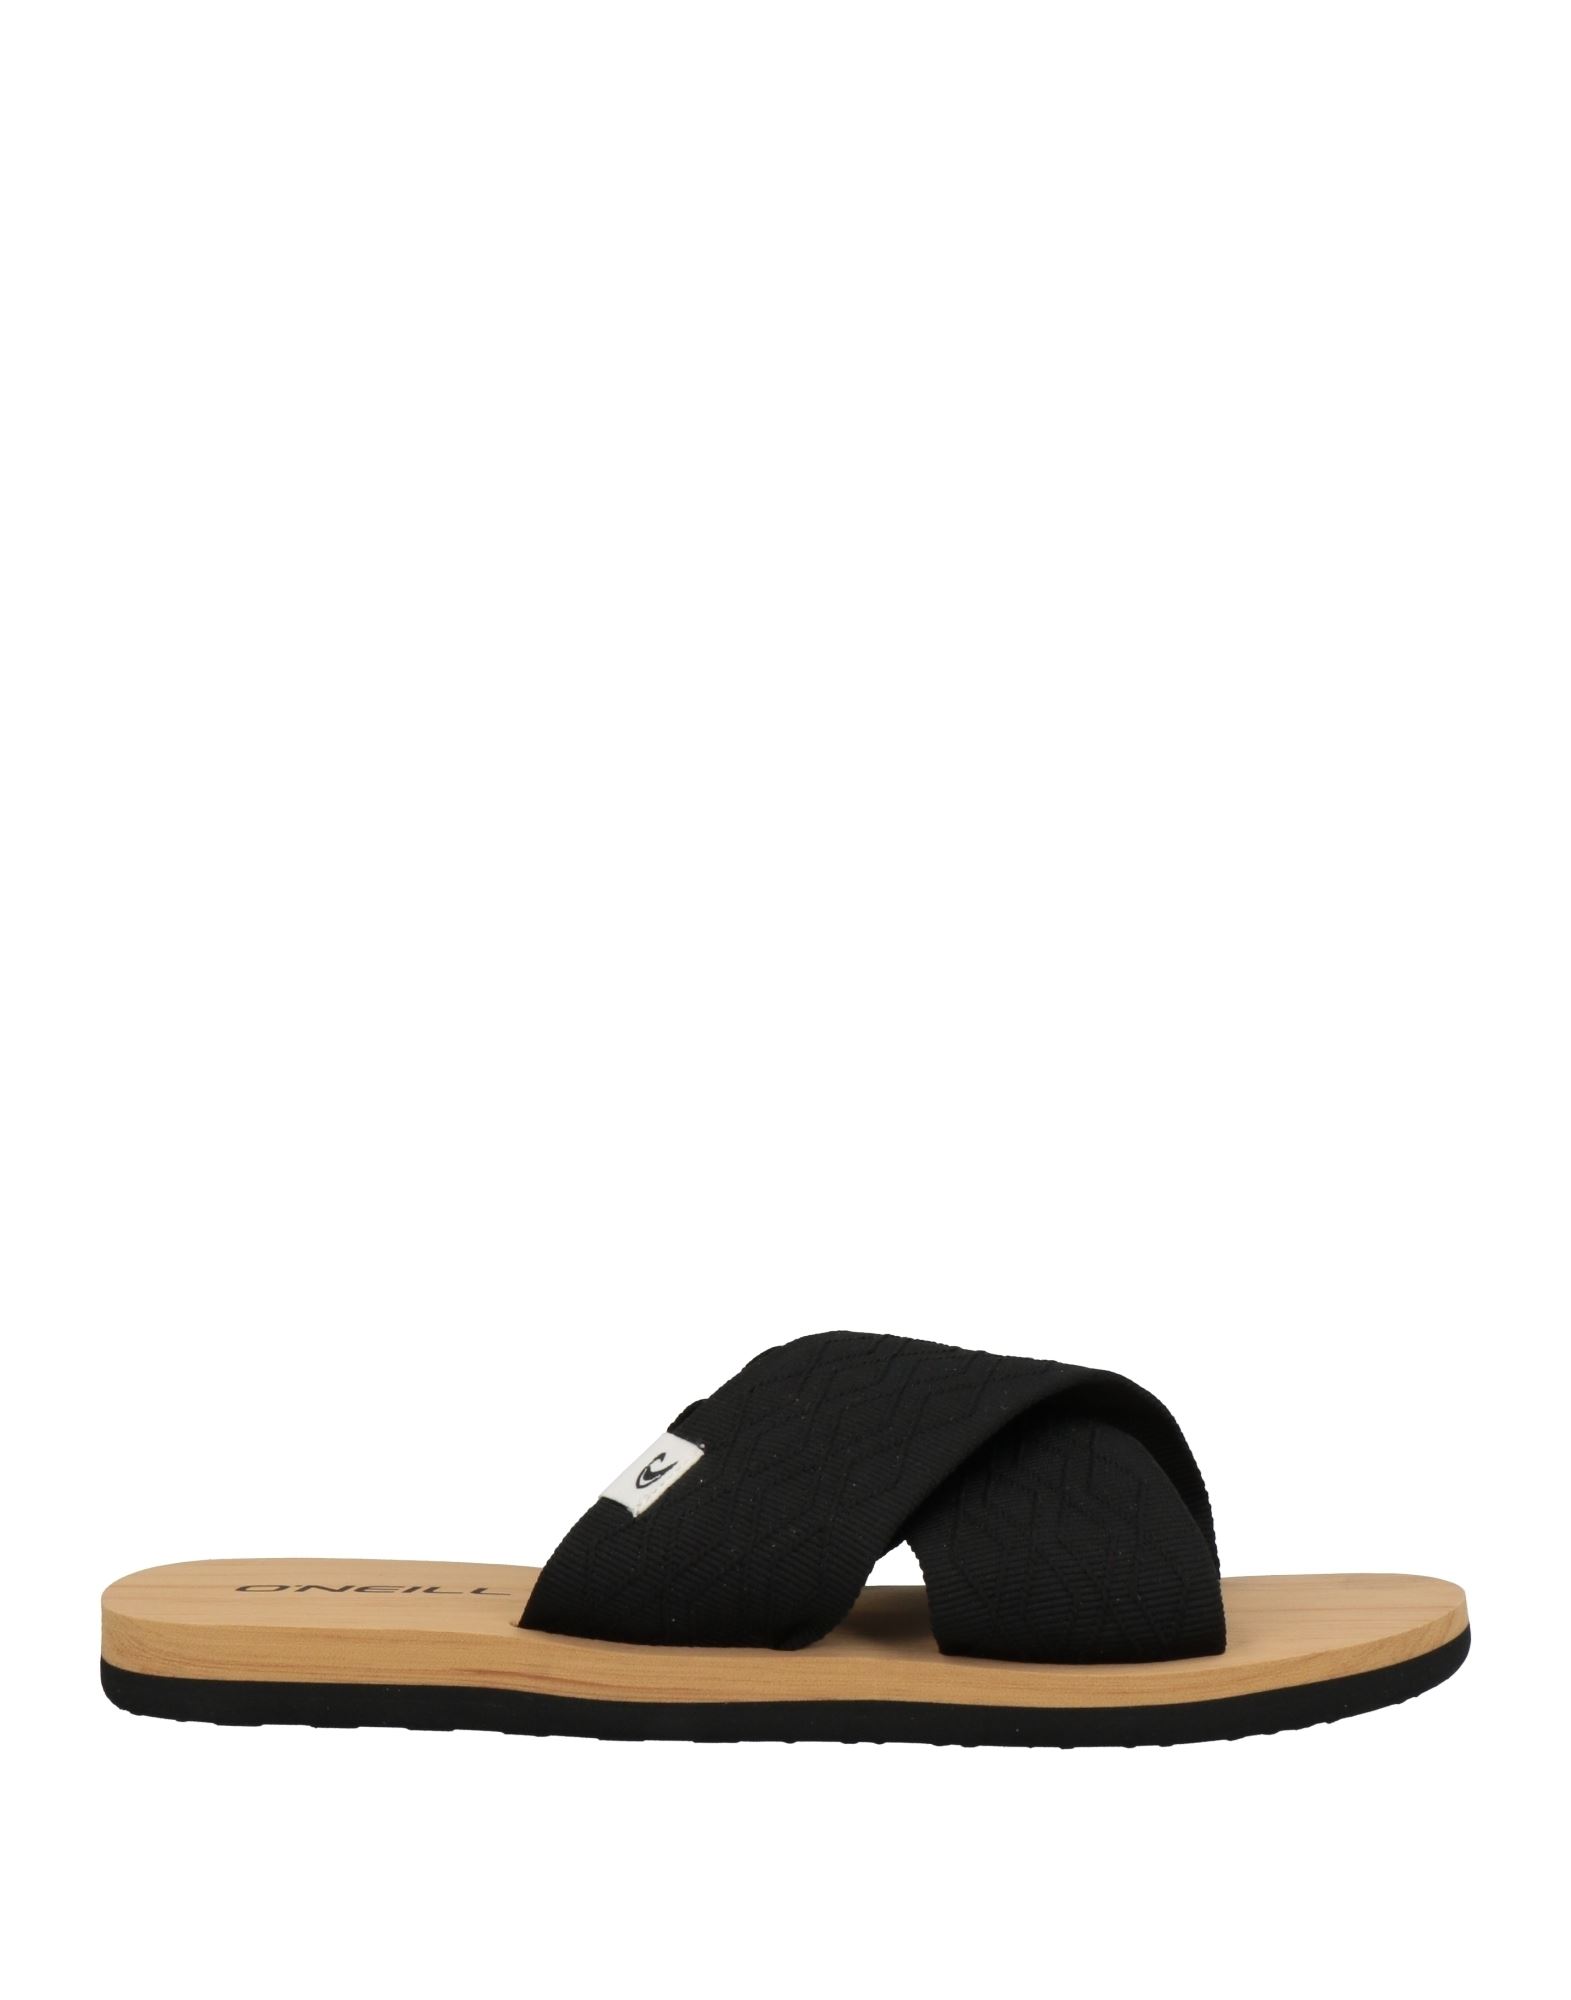 O'neill Sandals In Black